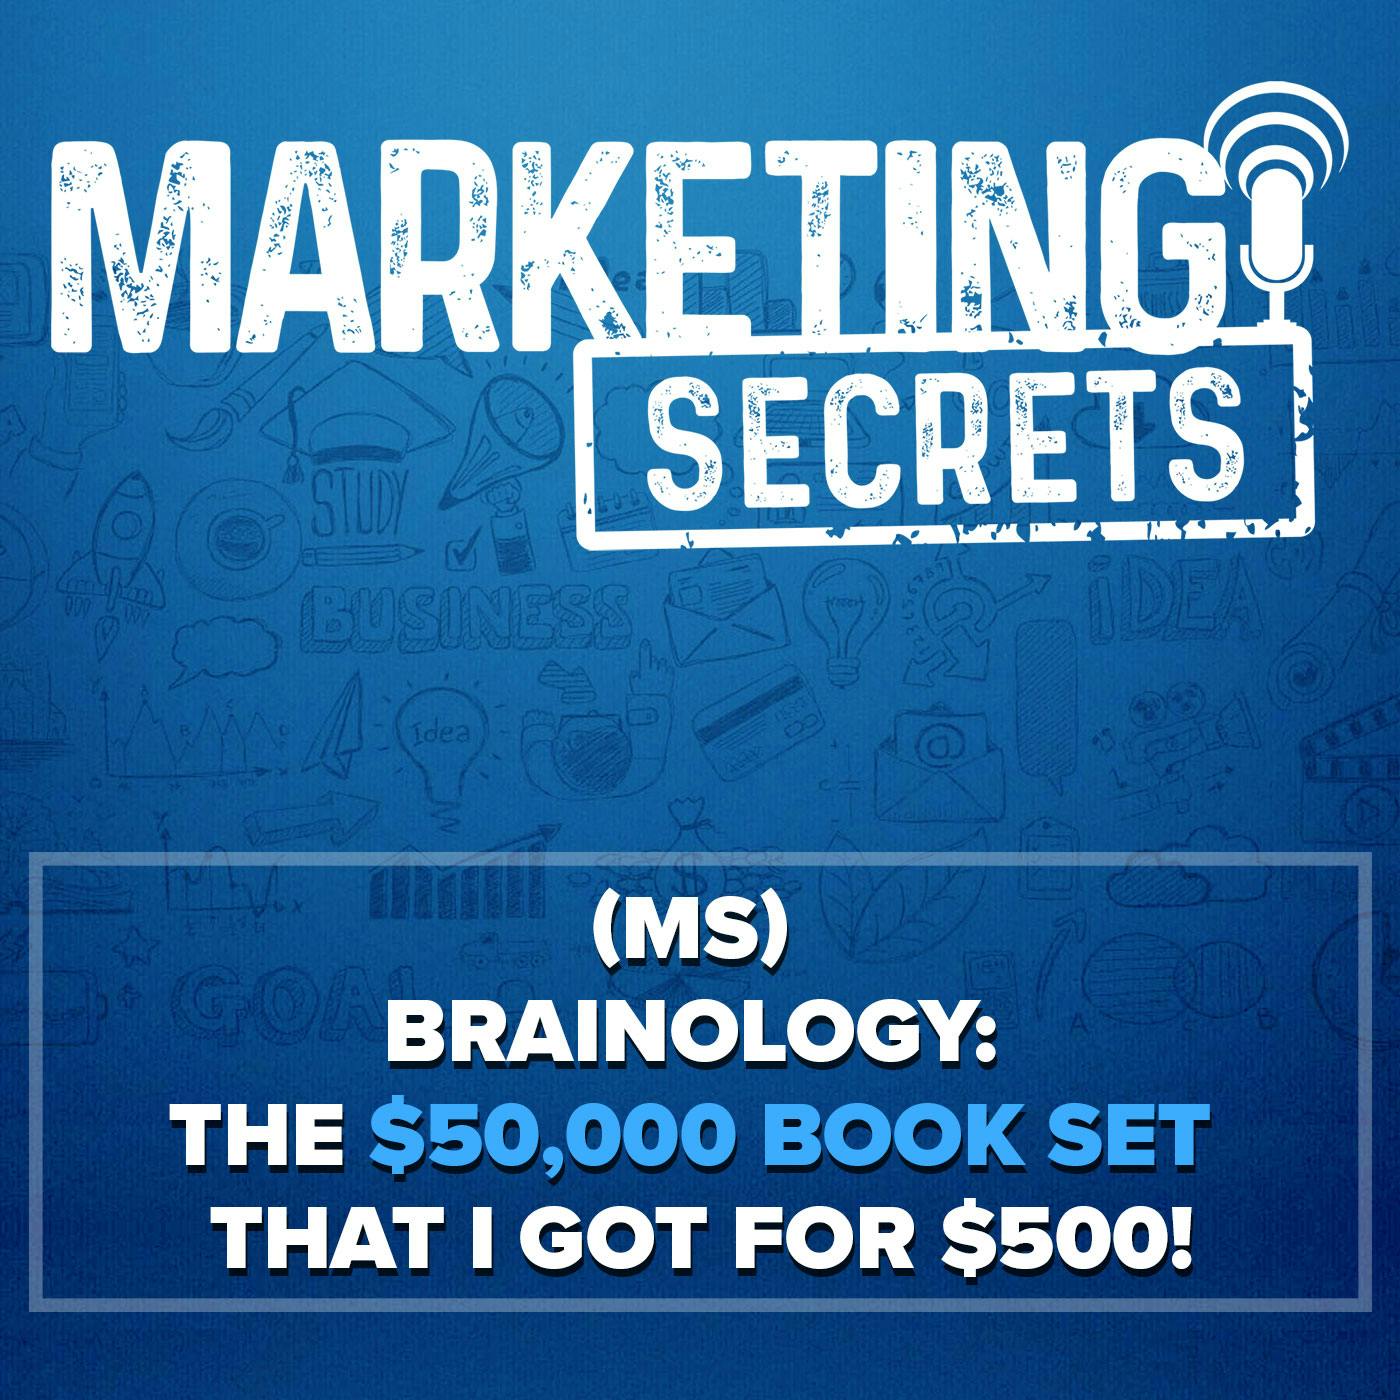 (MS) Brainology: The $50,000 Book Set That I Got For $500!